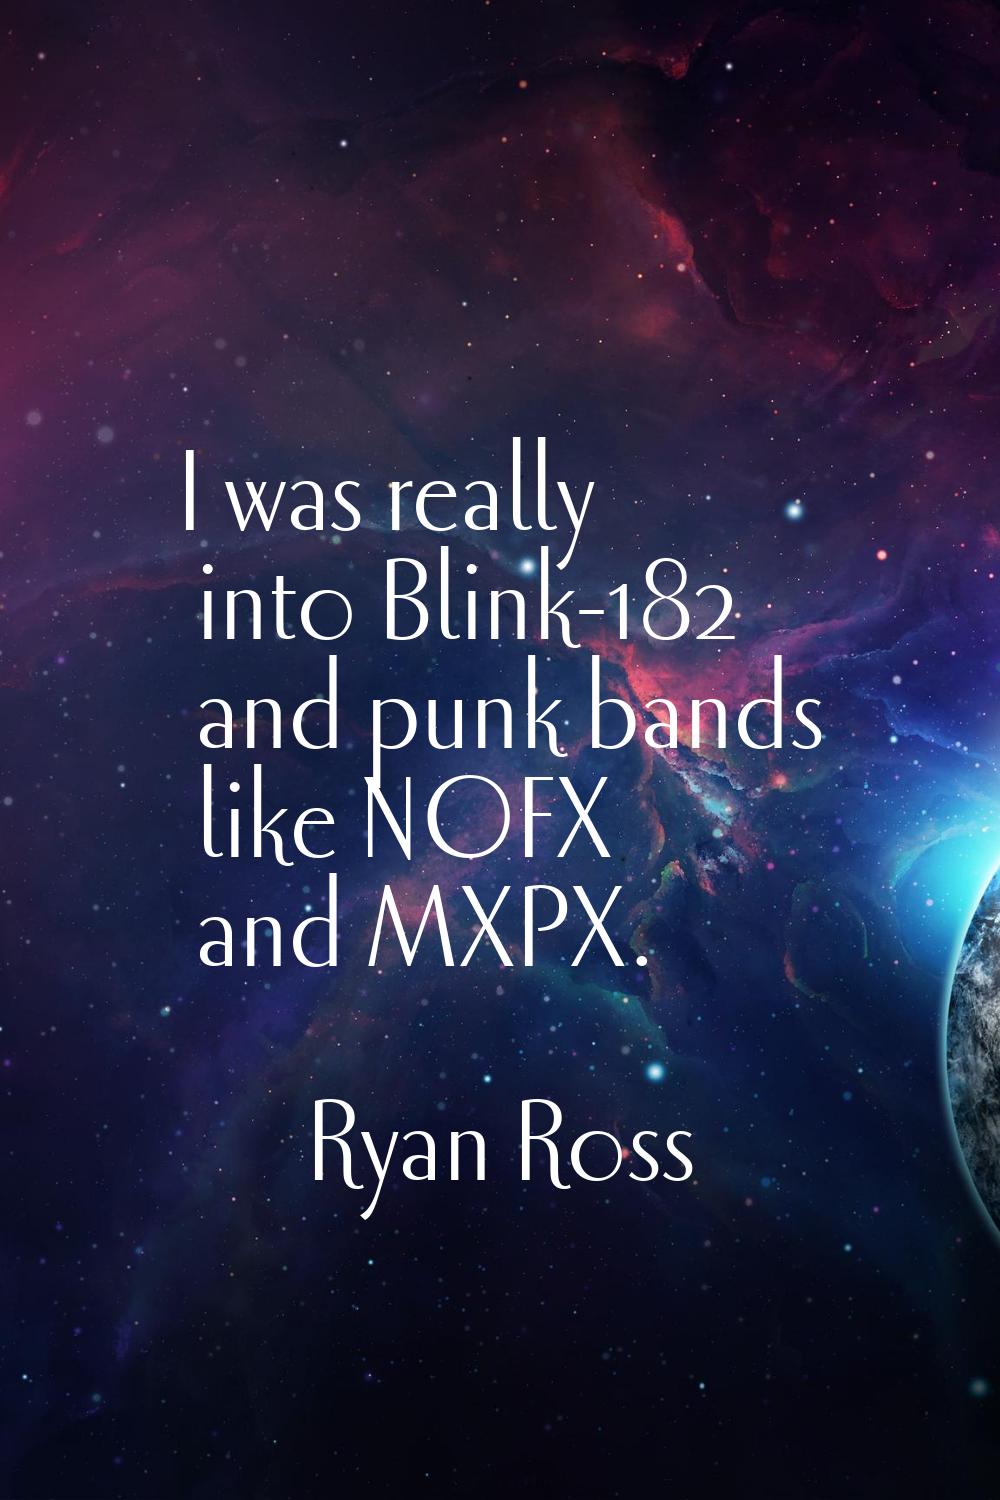 I was really into Blink-182 and punk bands like NOFX and MXPX.